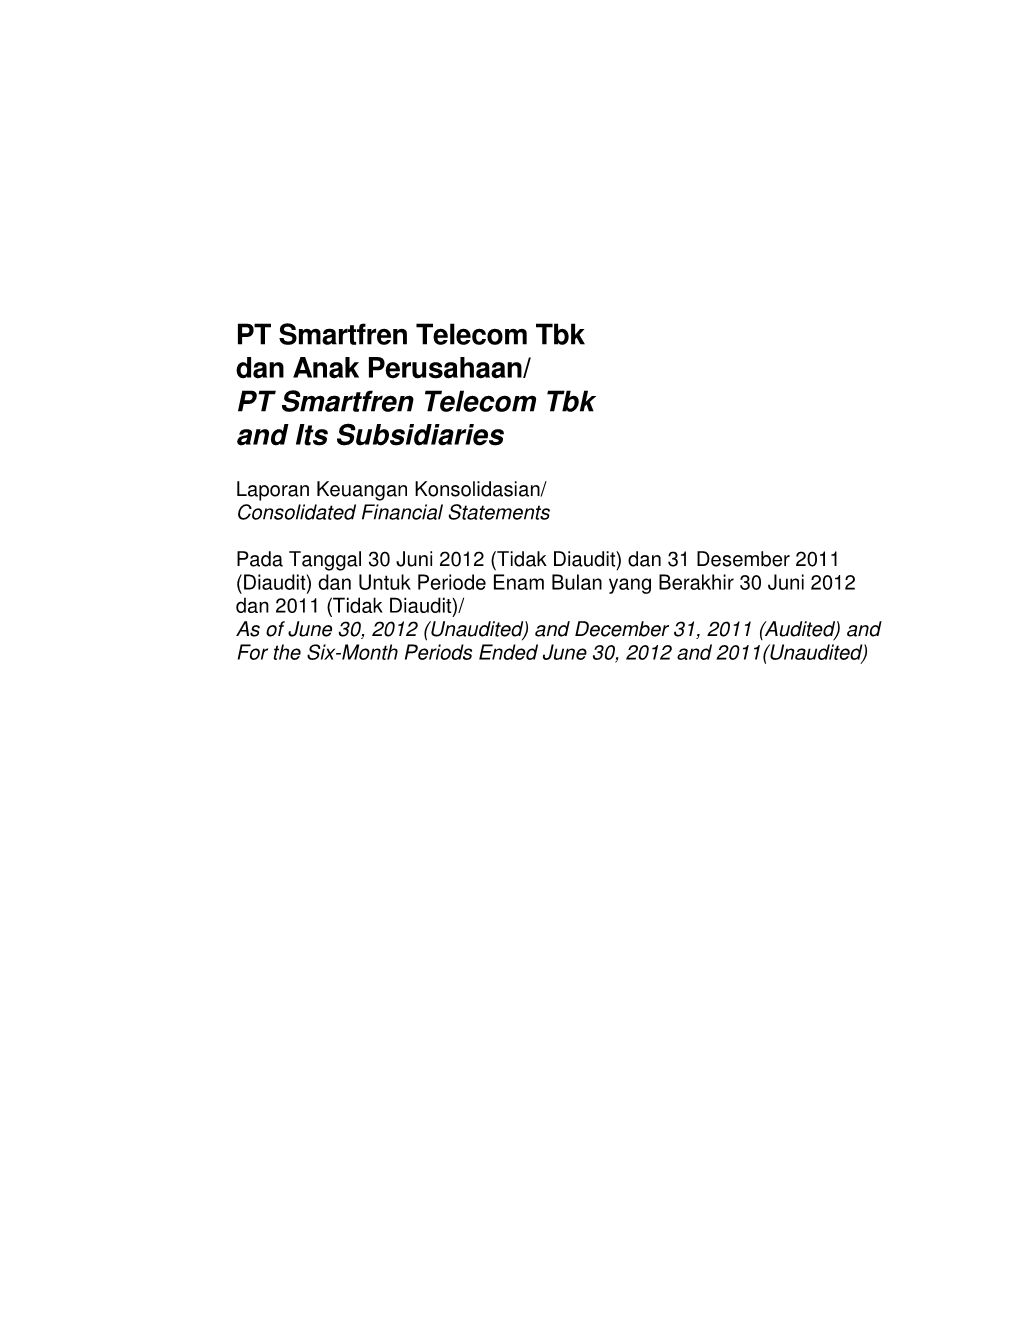 PT Smartfren Telecom Tbk and Its Subsidiaries